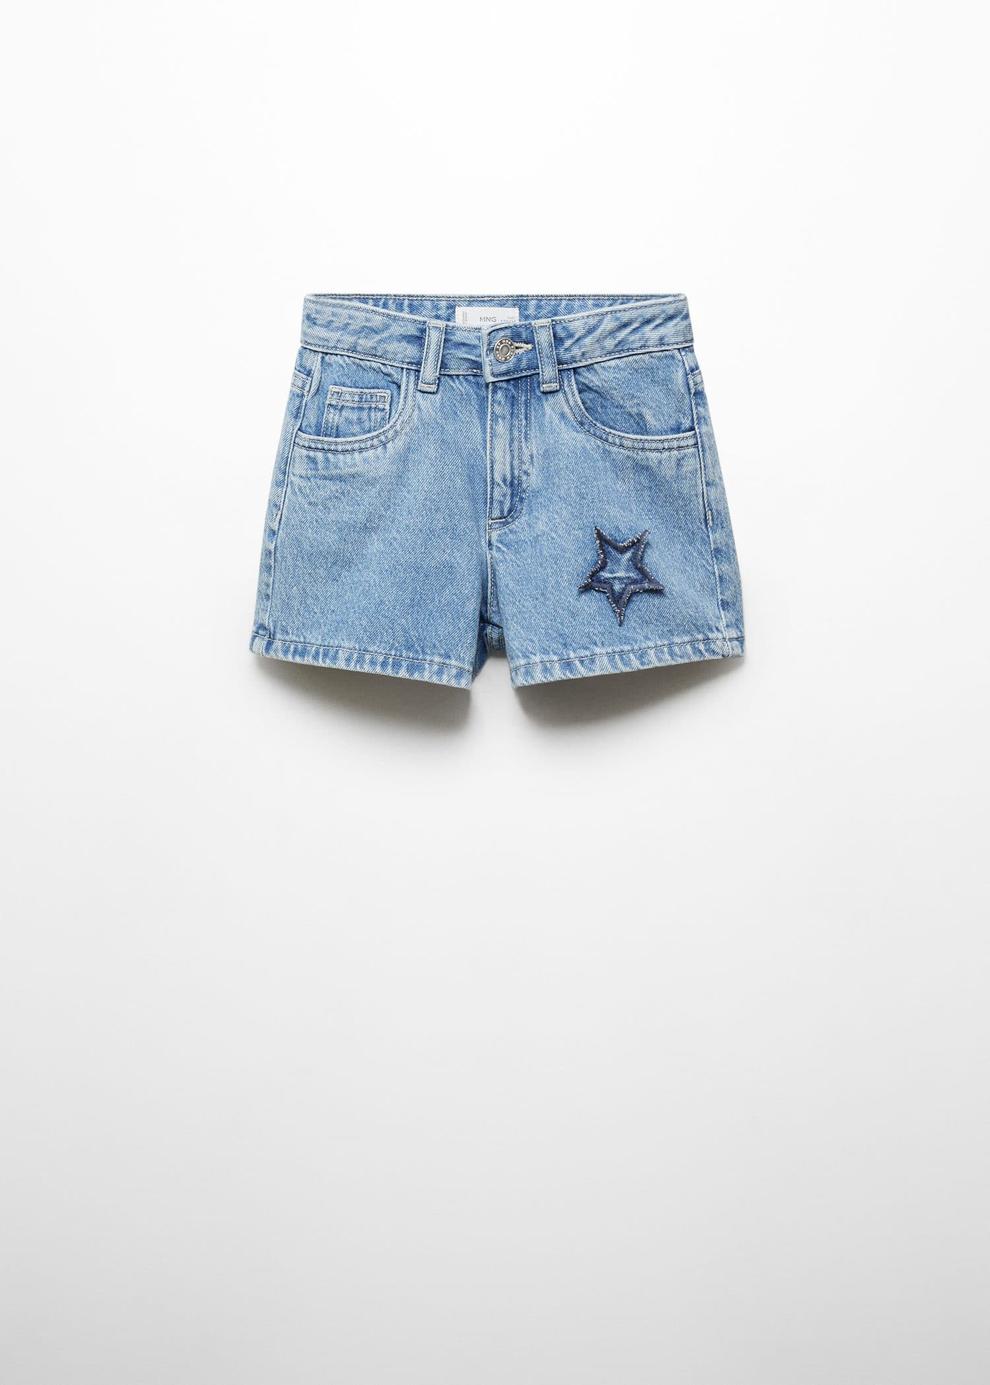 Star denim shorts offers at S$ 45.9 in Mango Kids